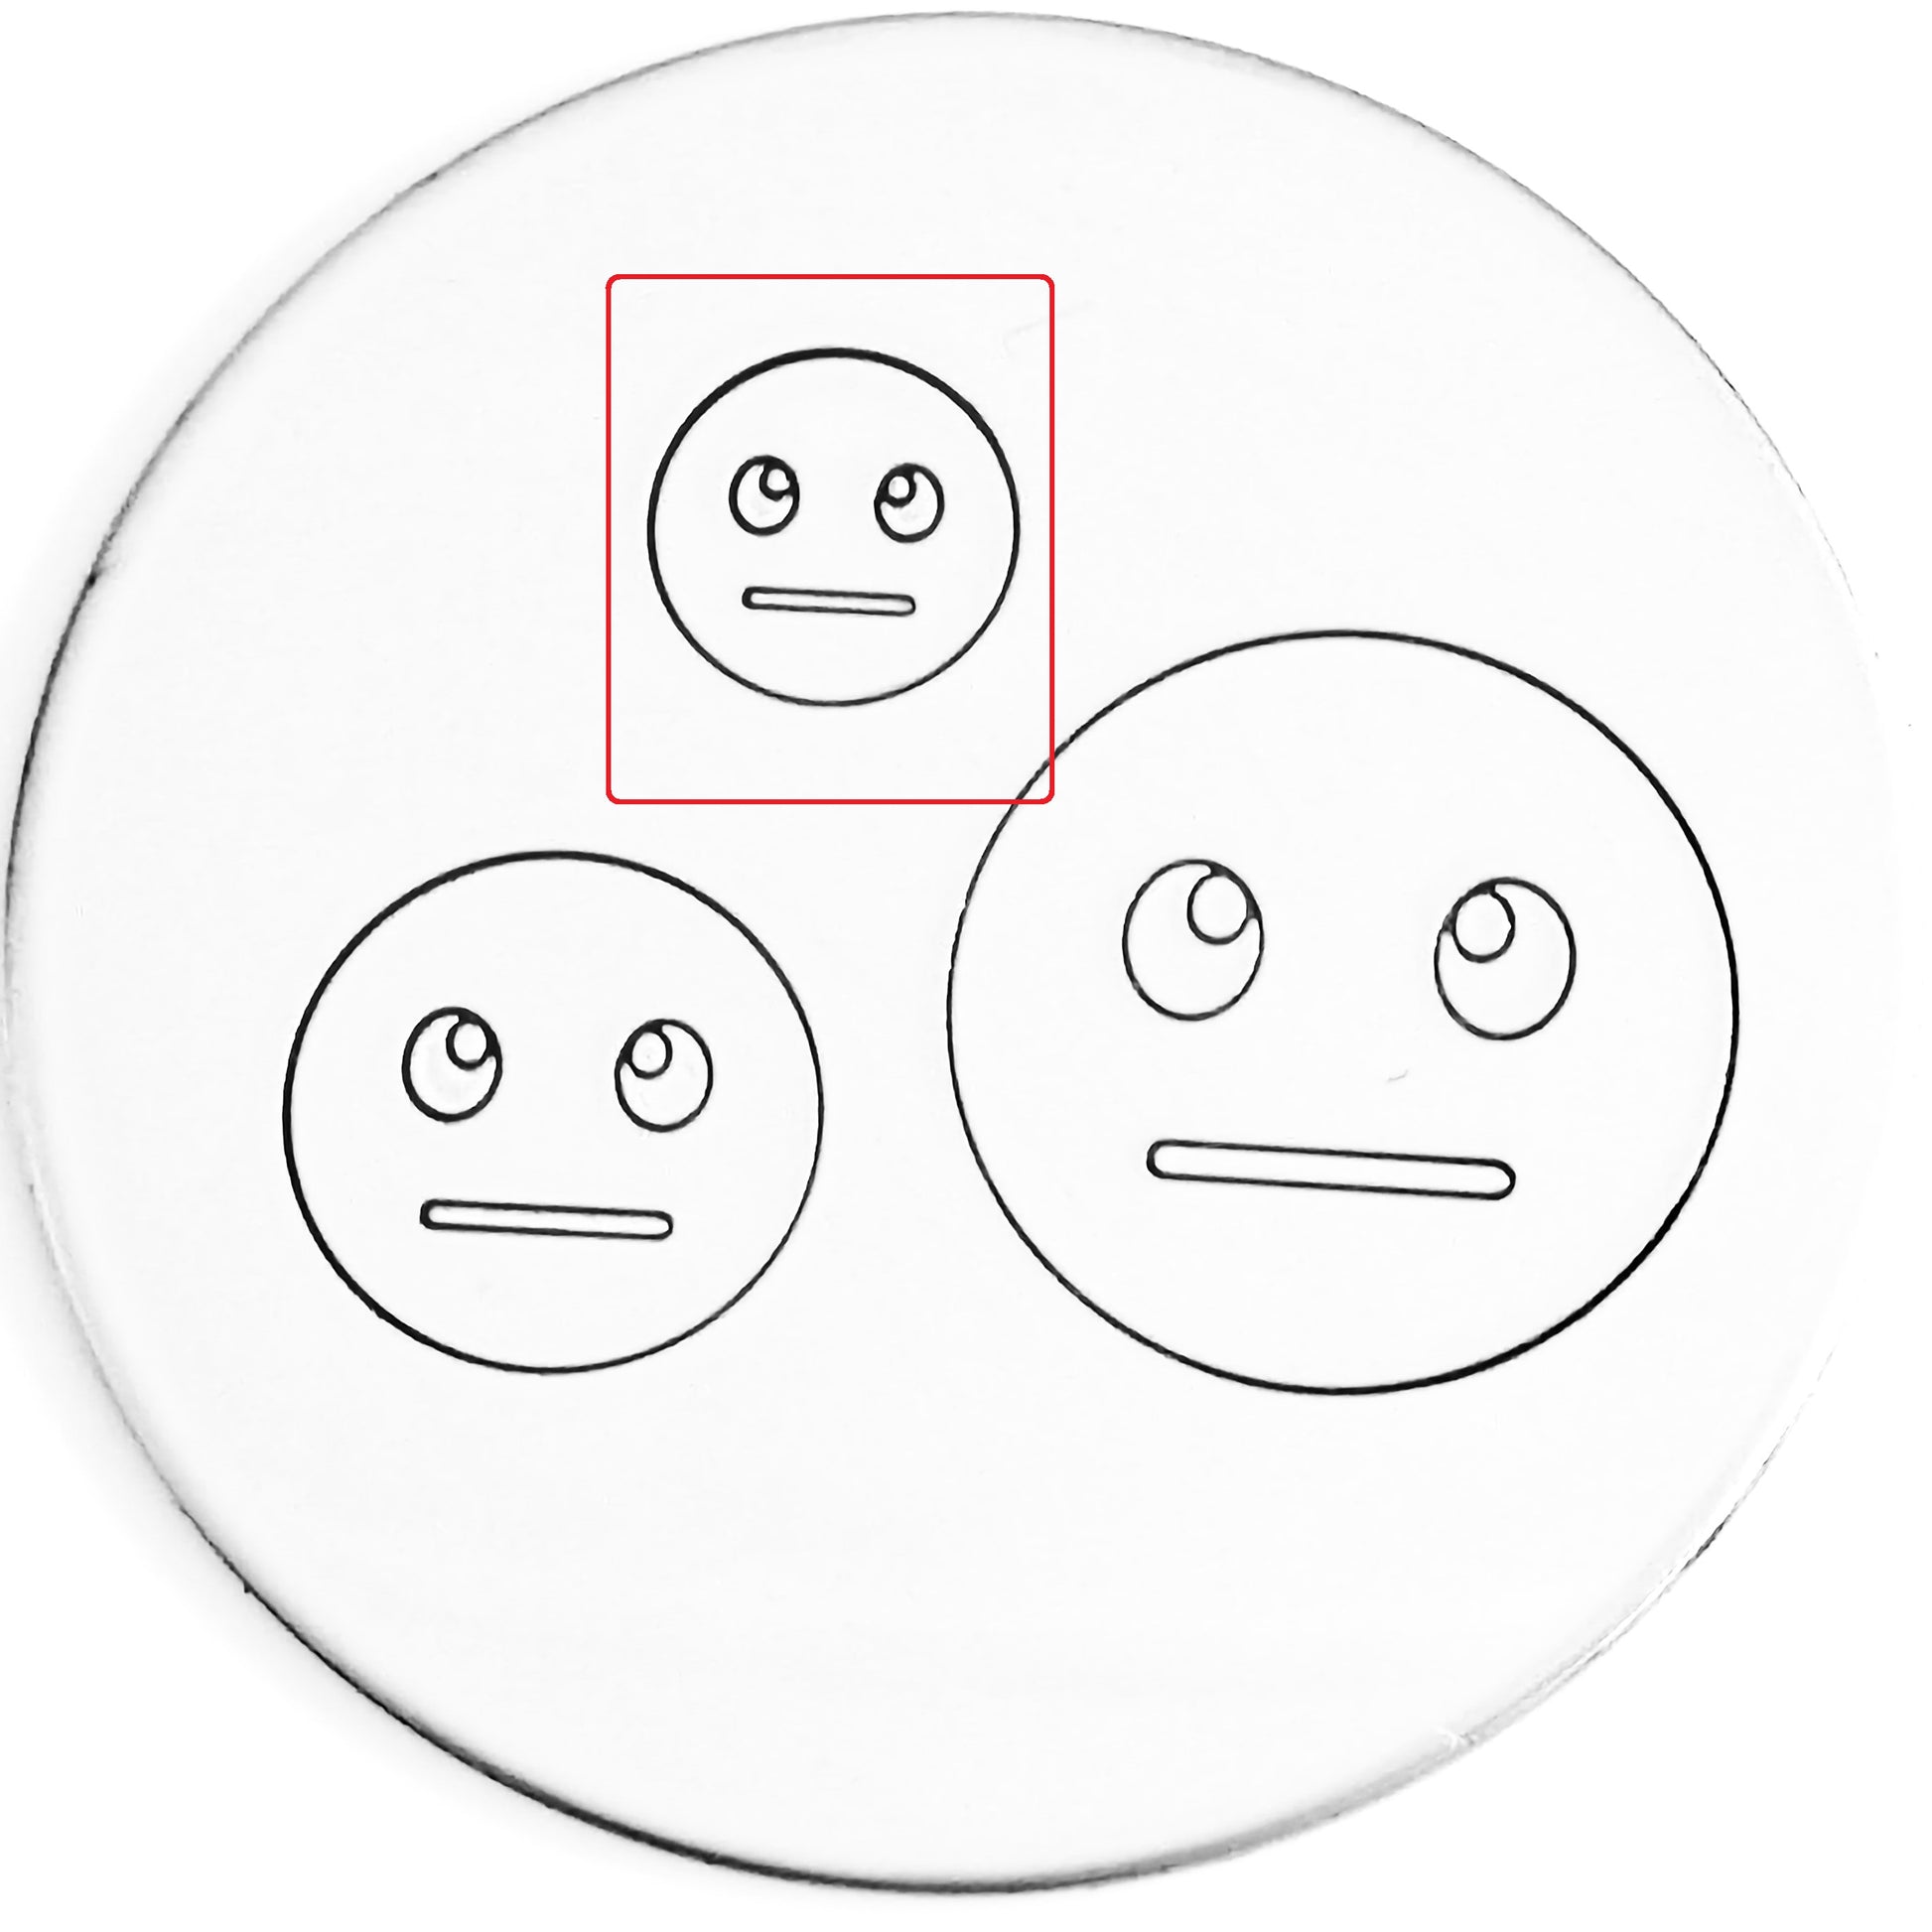 straight face clipart black and white